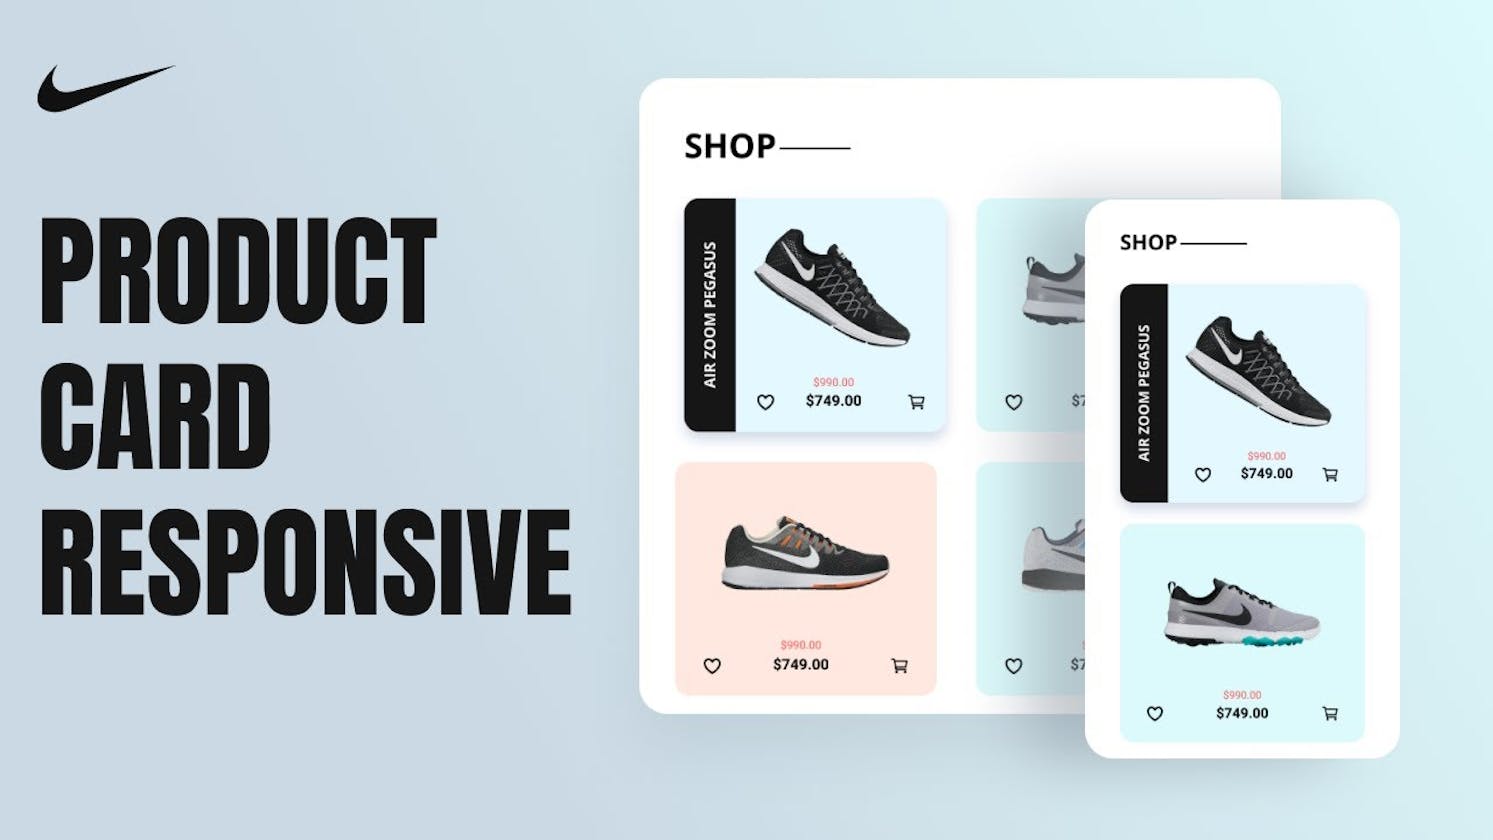 Create a Responsive Product Card UI using HTML and CSS